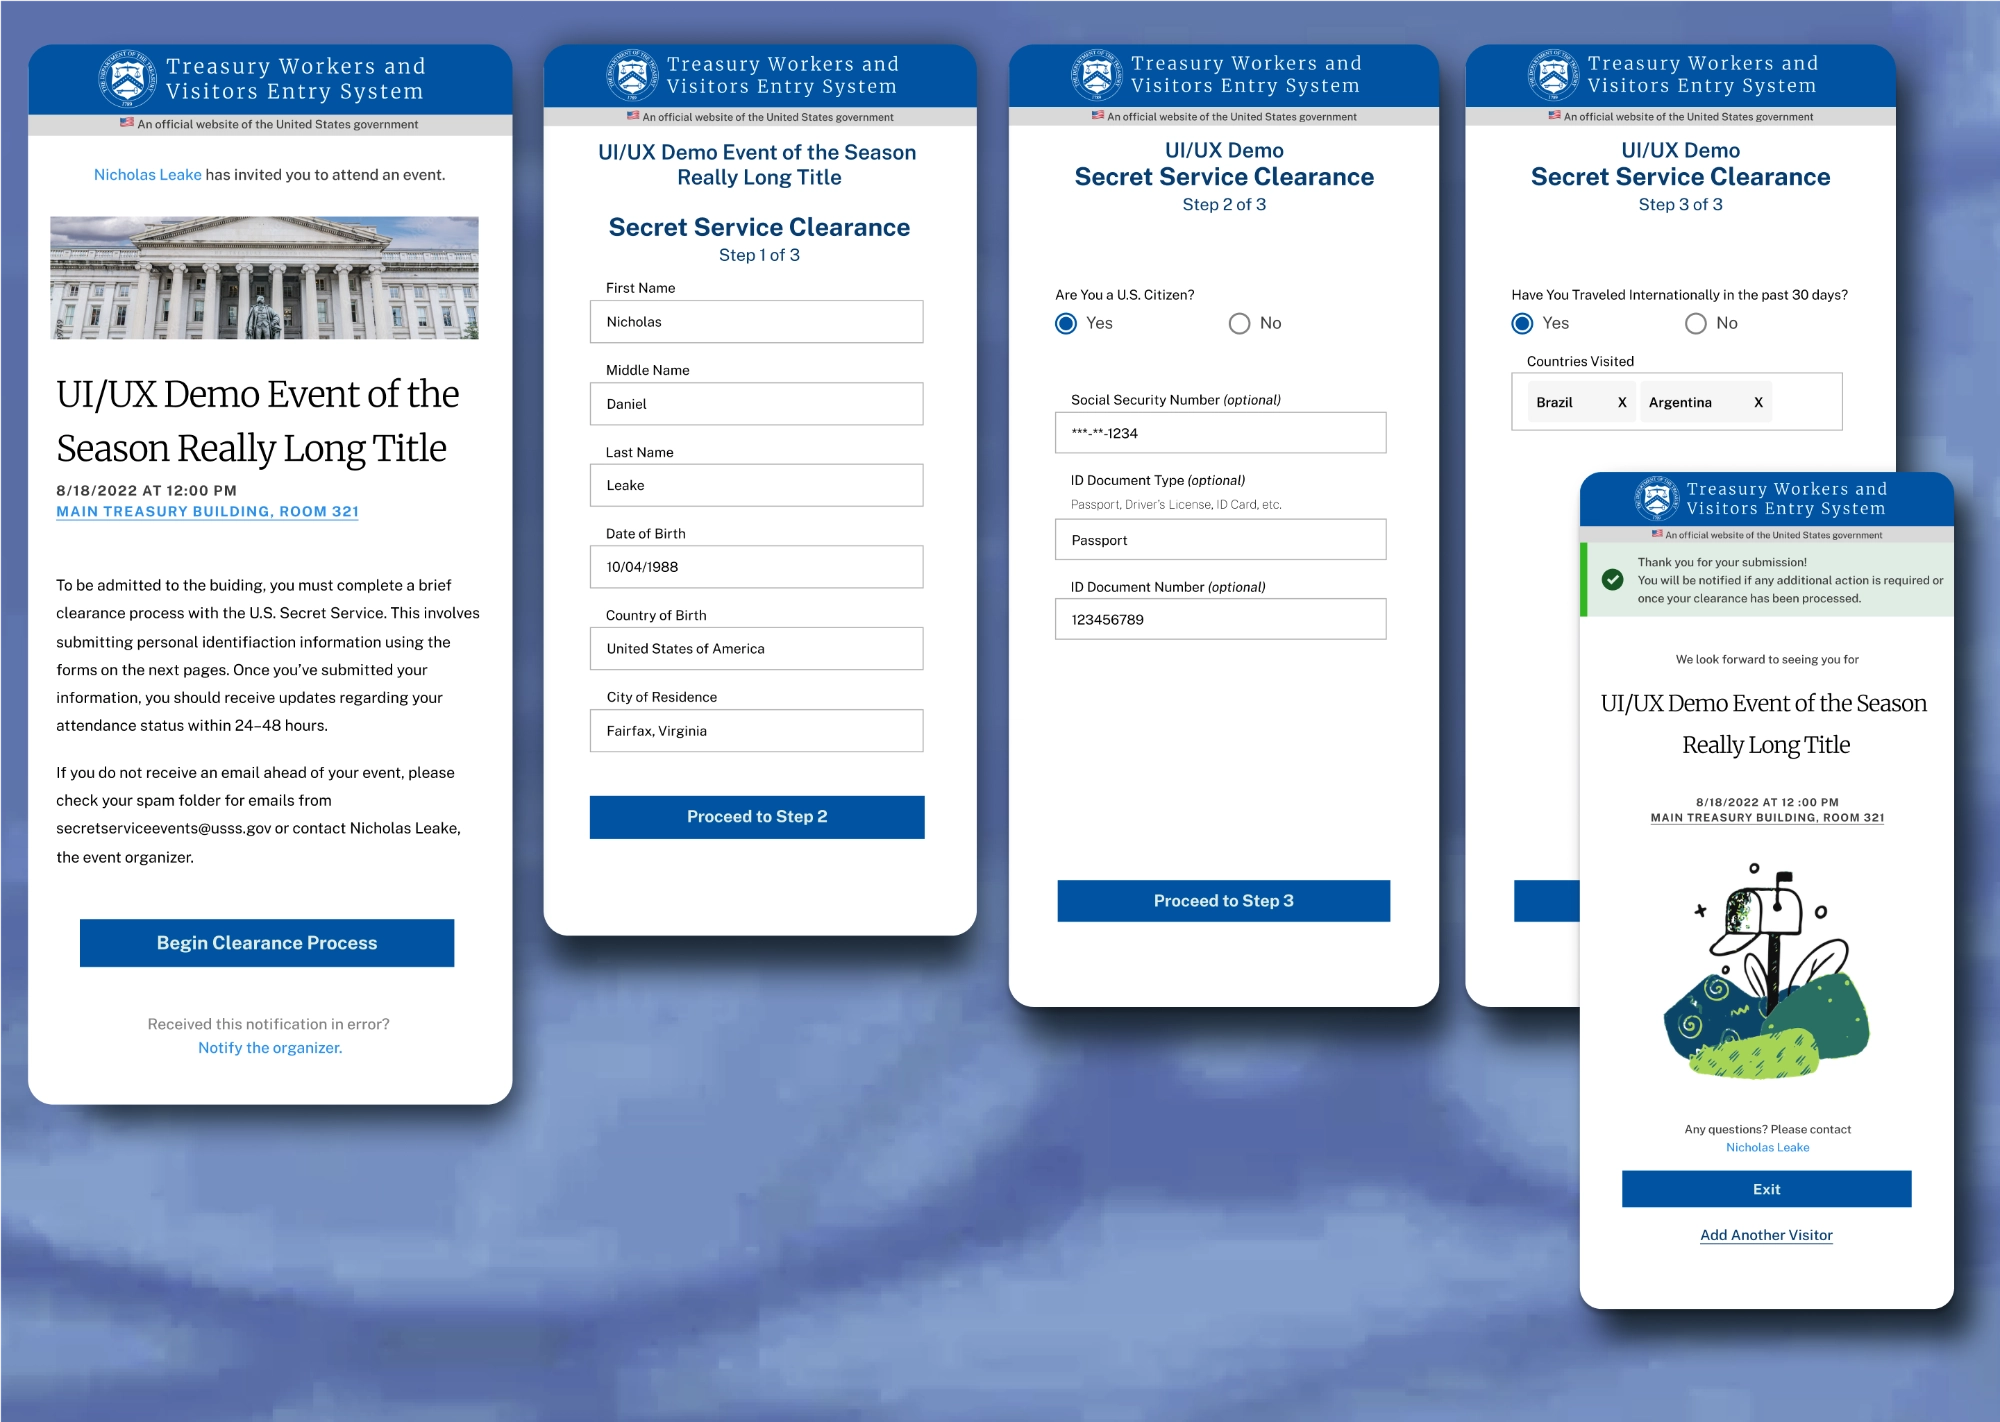 mobile UI mockup of an events application for the US Treasury Department using the Treasury Digital Design System.